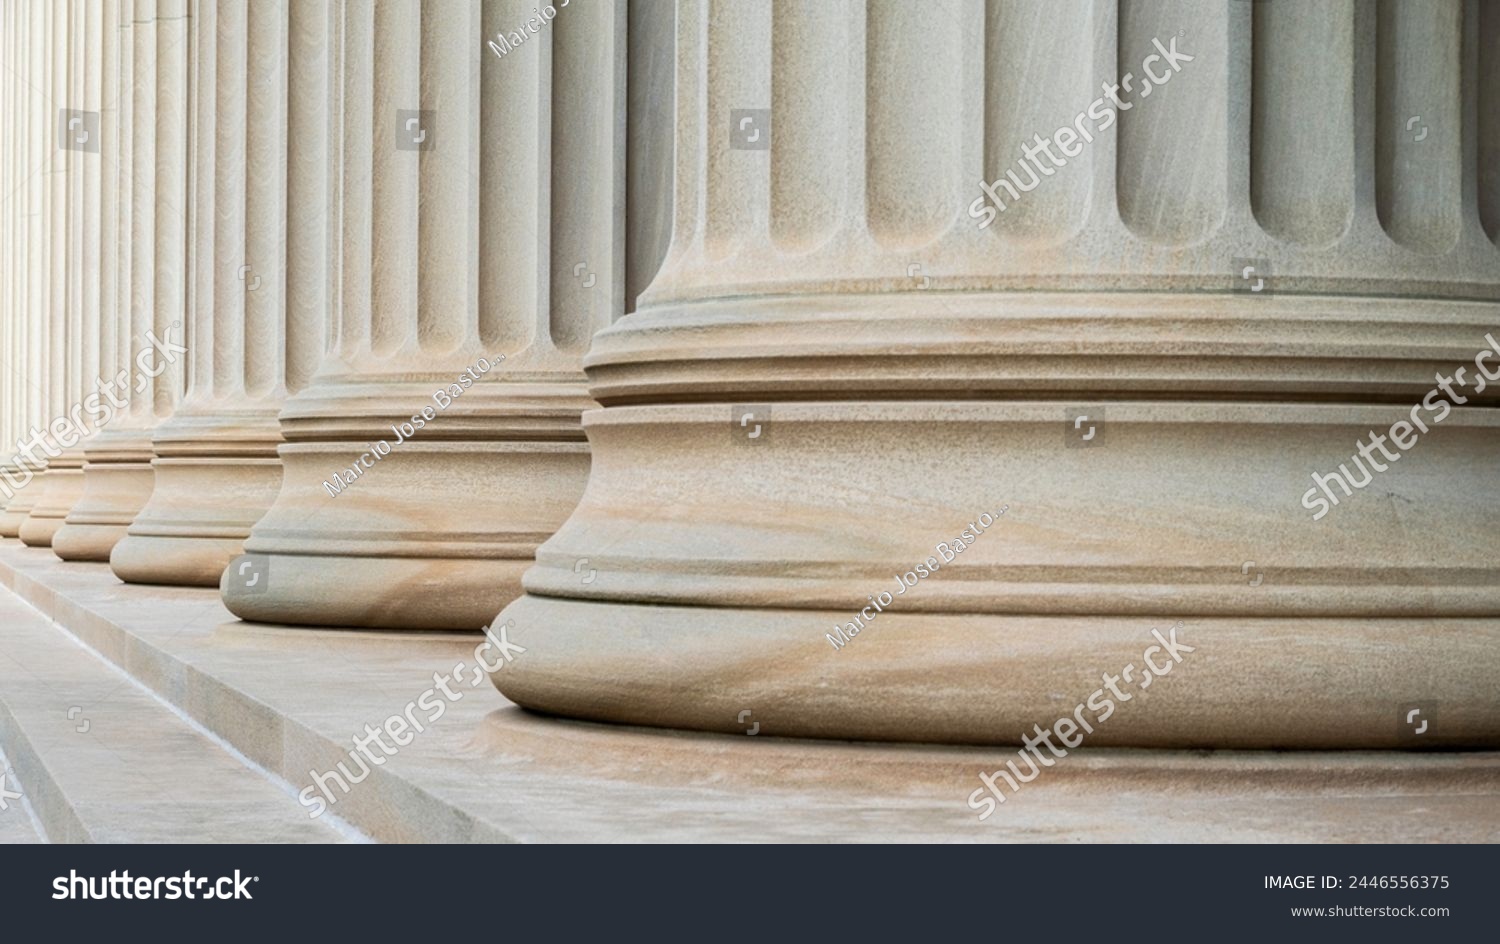 Architectural detail of some neoclassical columns symbolizing justice and the law of the land. #2446556375